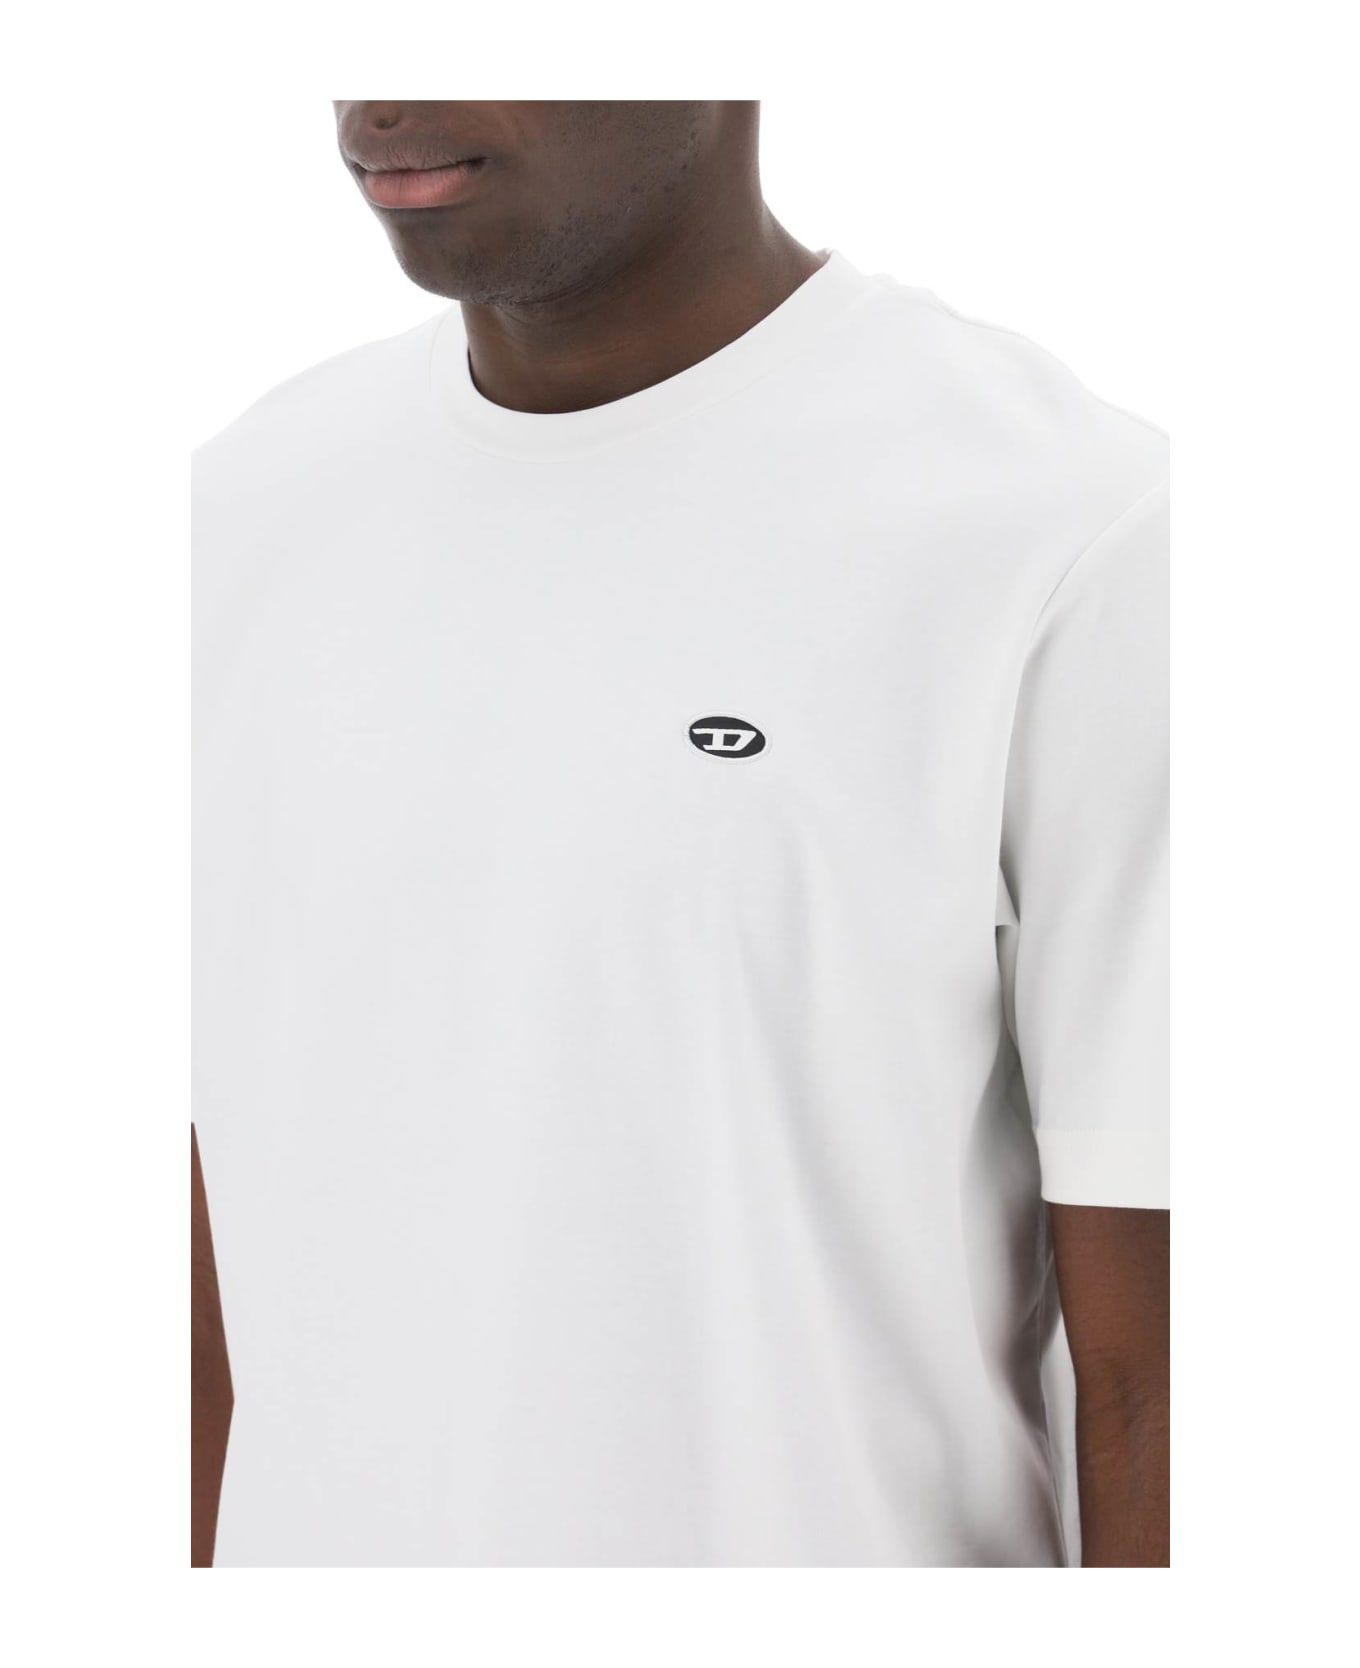 Diesel T-just-doval-pj Crewneck T-shirt - OFF WHITE (White)